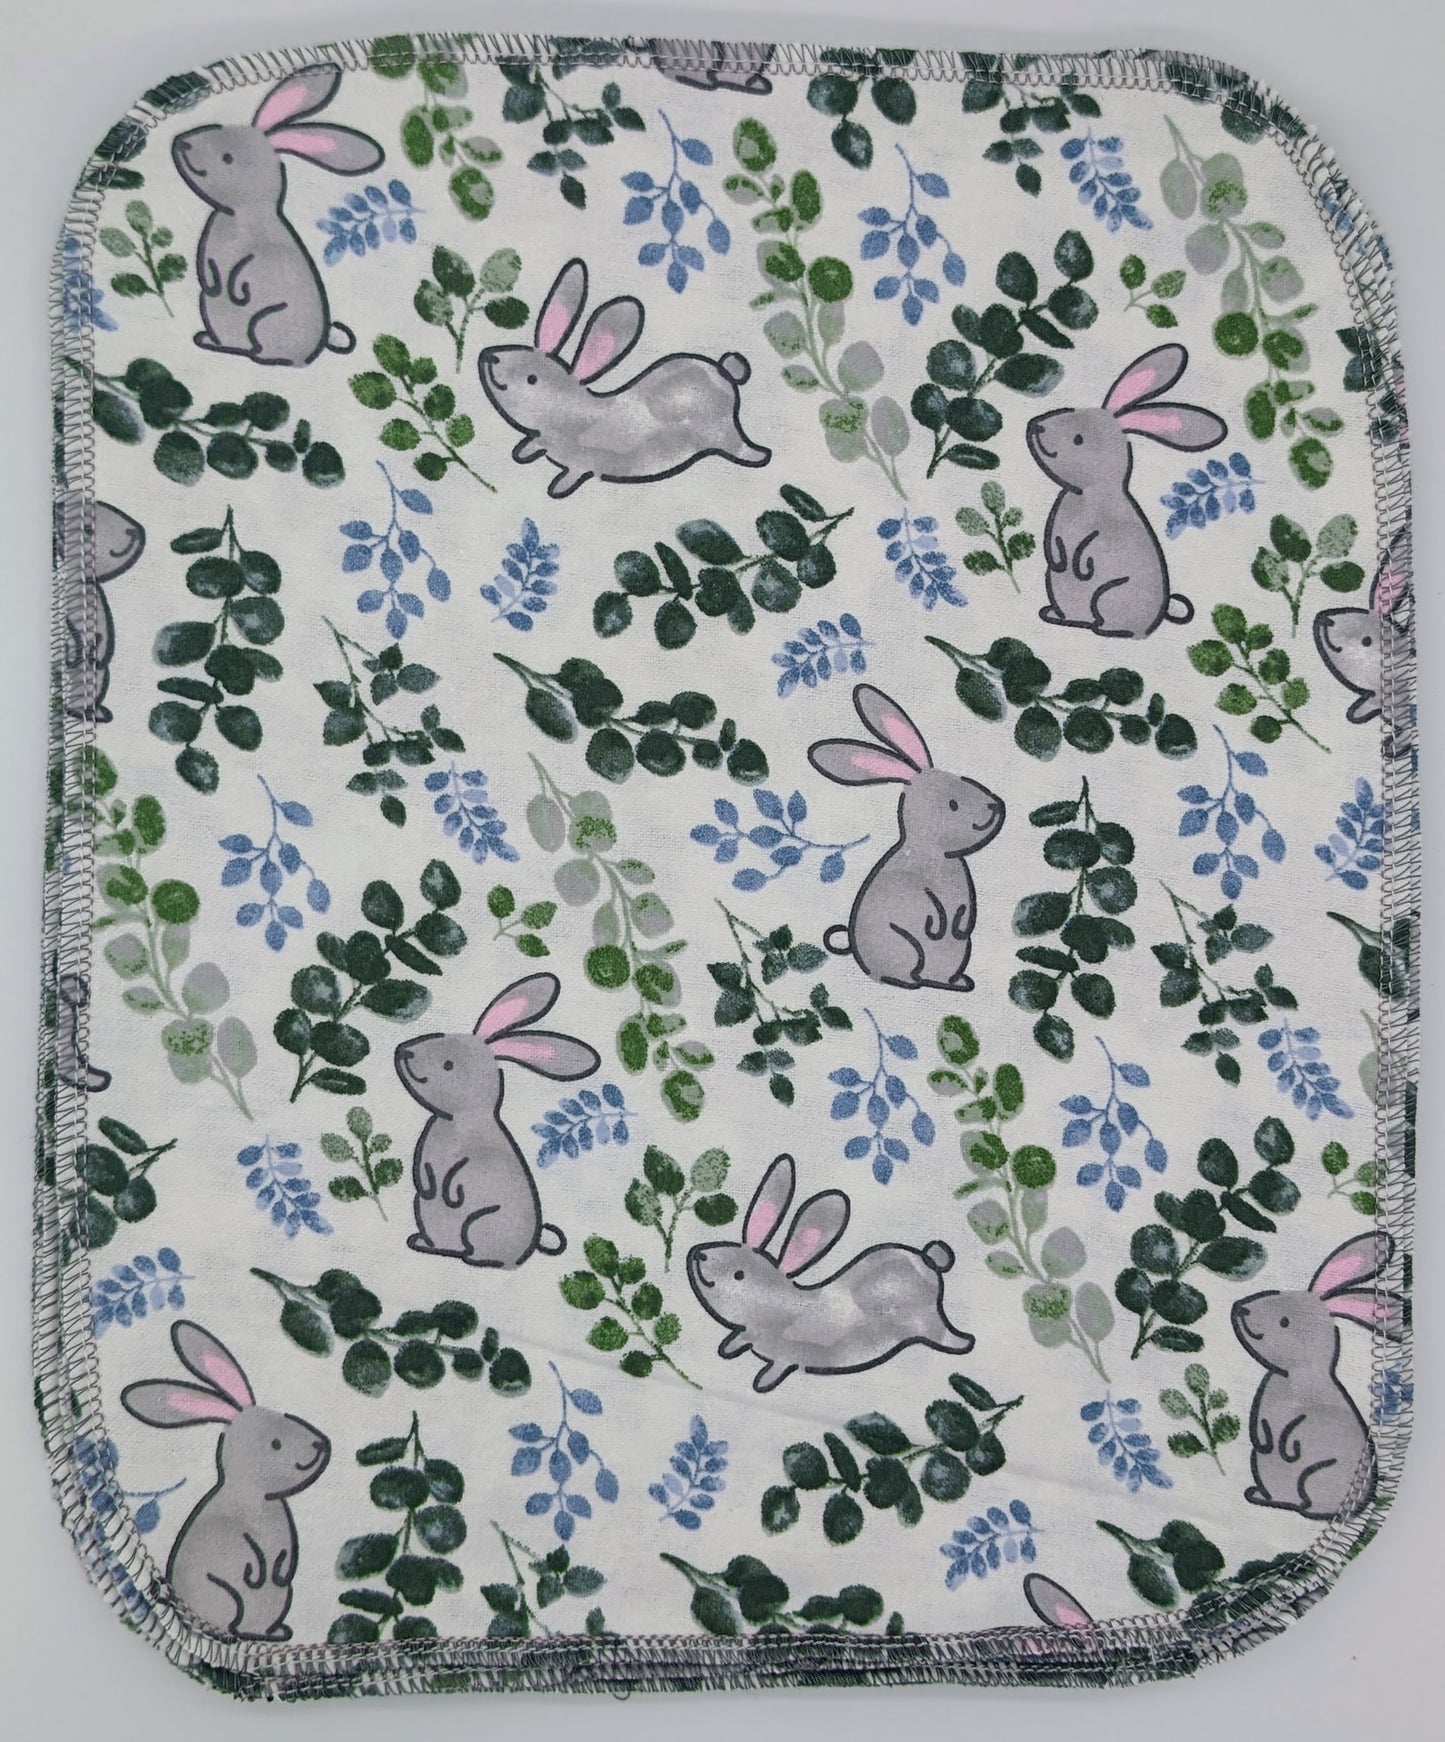 Bunny Re-usable Paper Towels